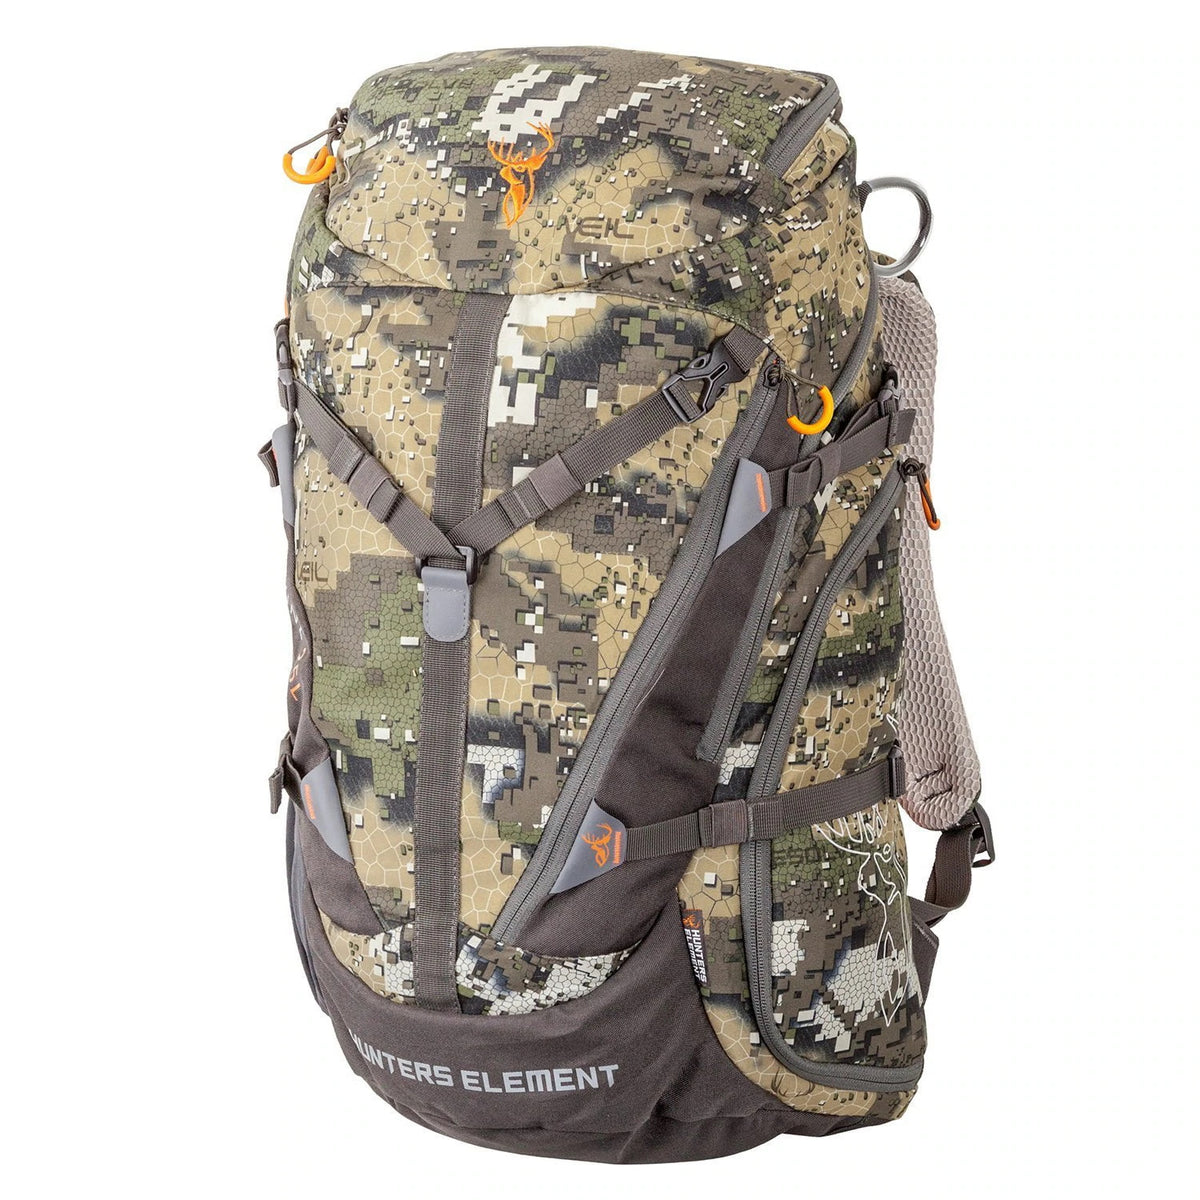 Hunters Element Canyon Pack